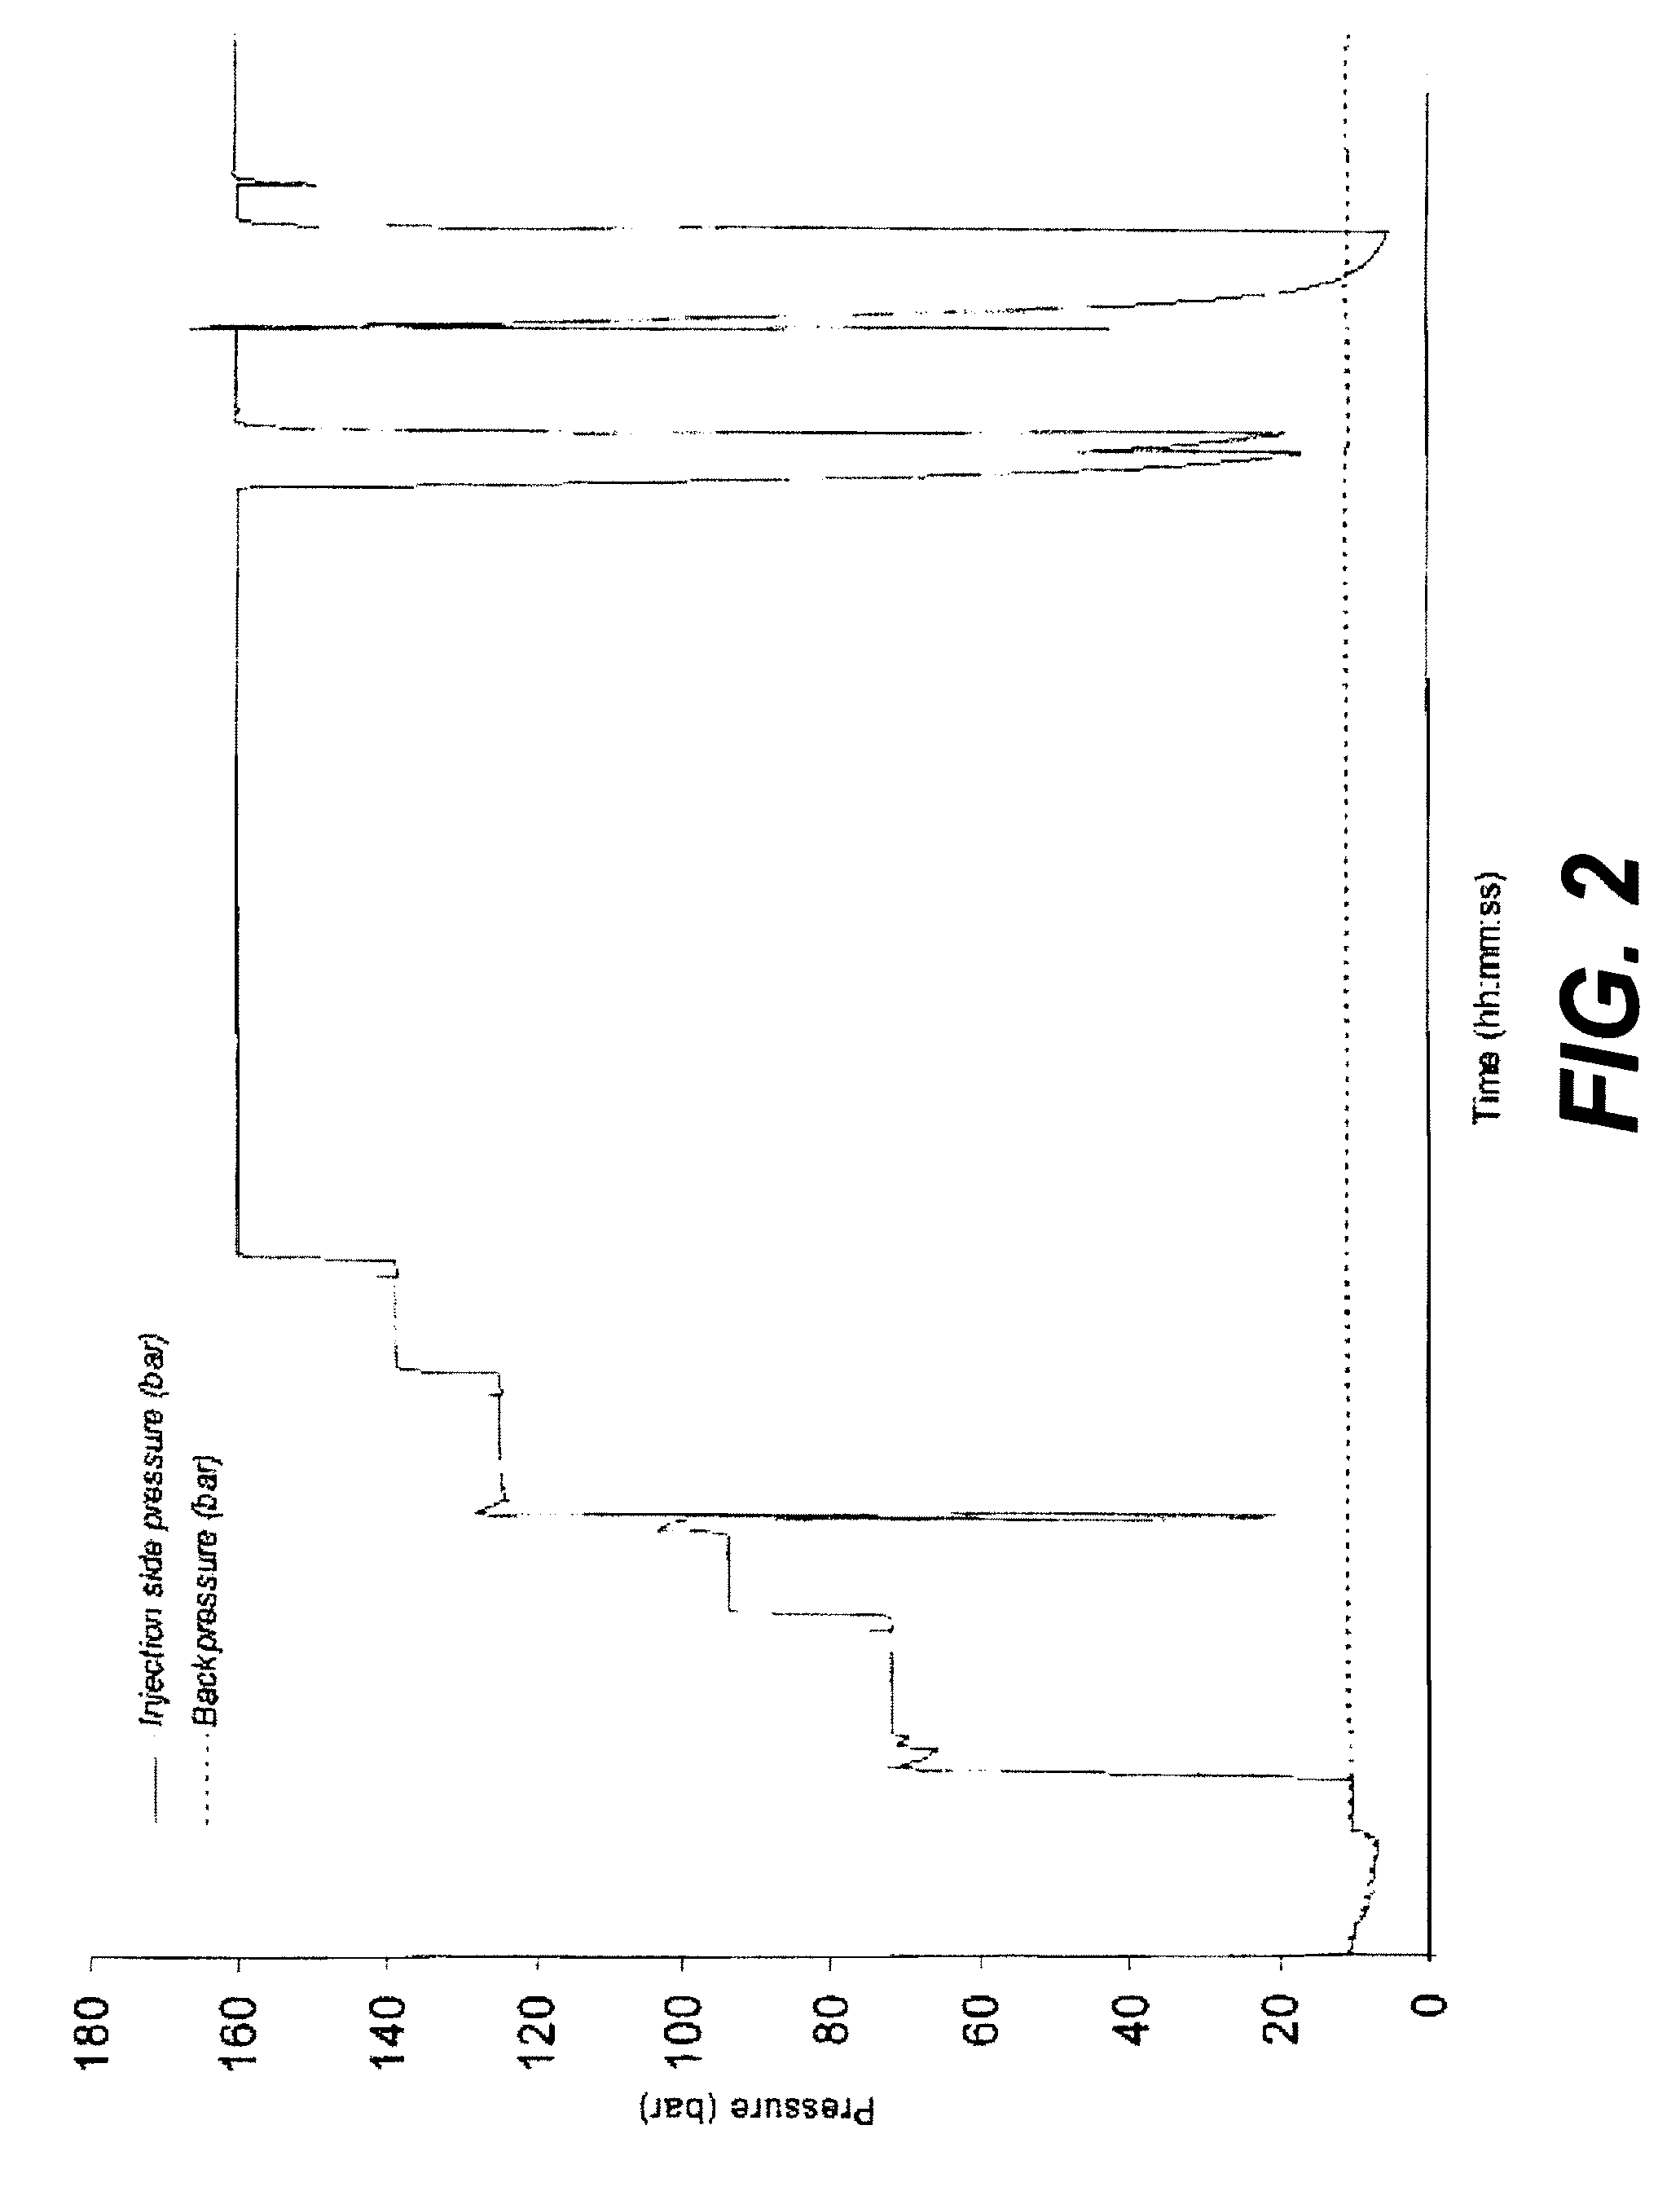 Methods of using colloidal silica based gels